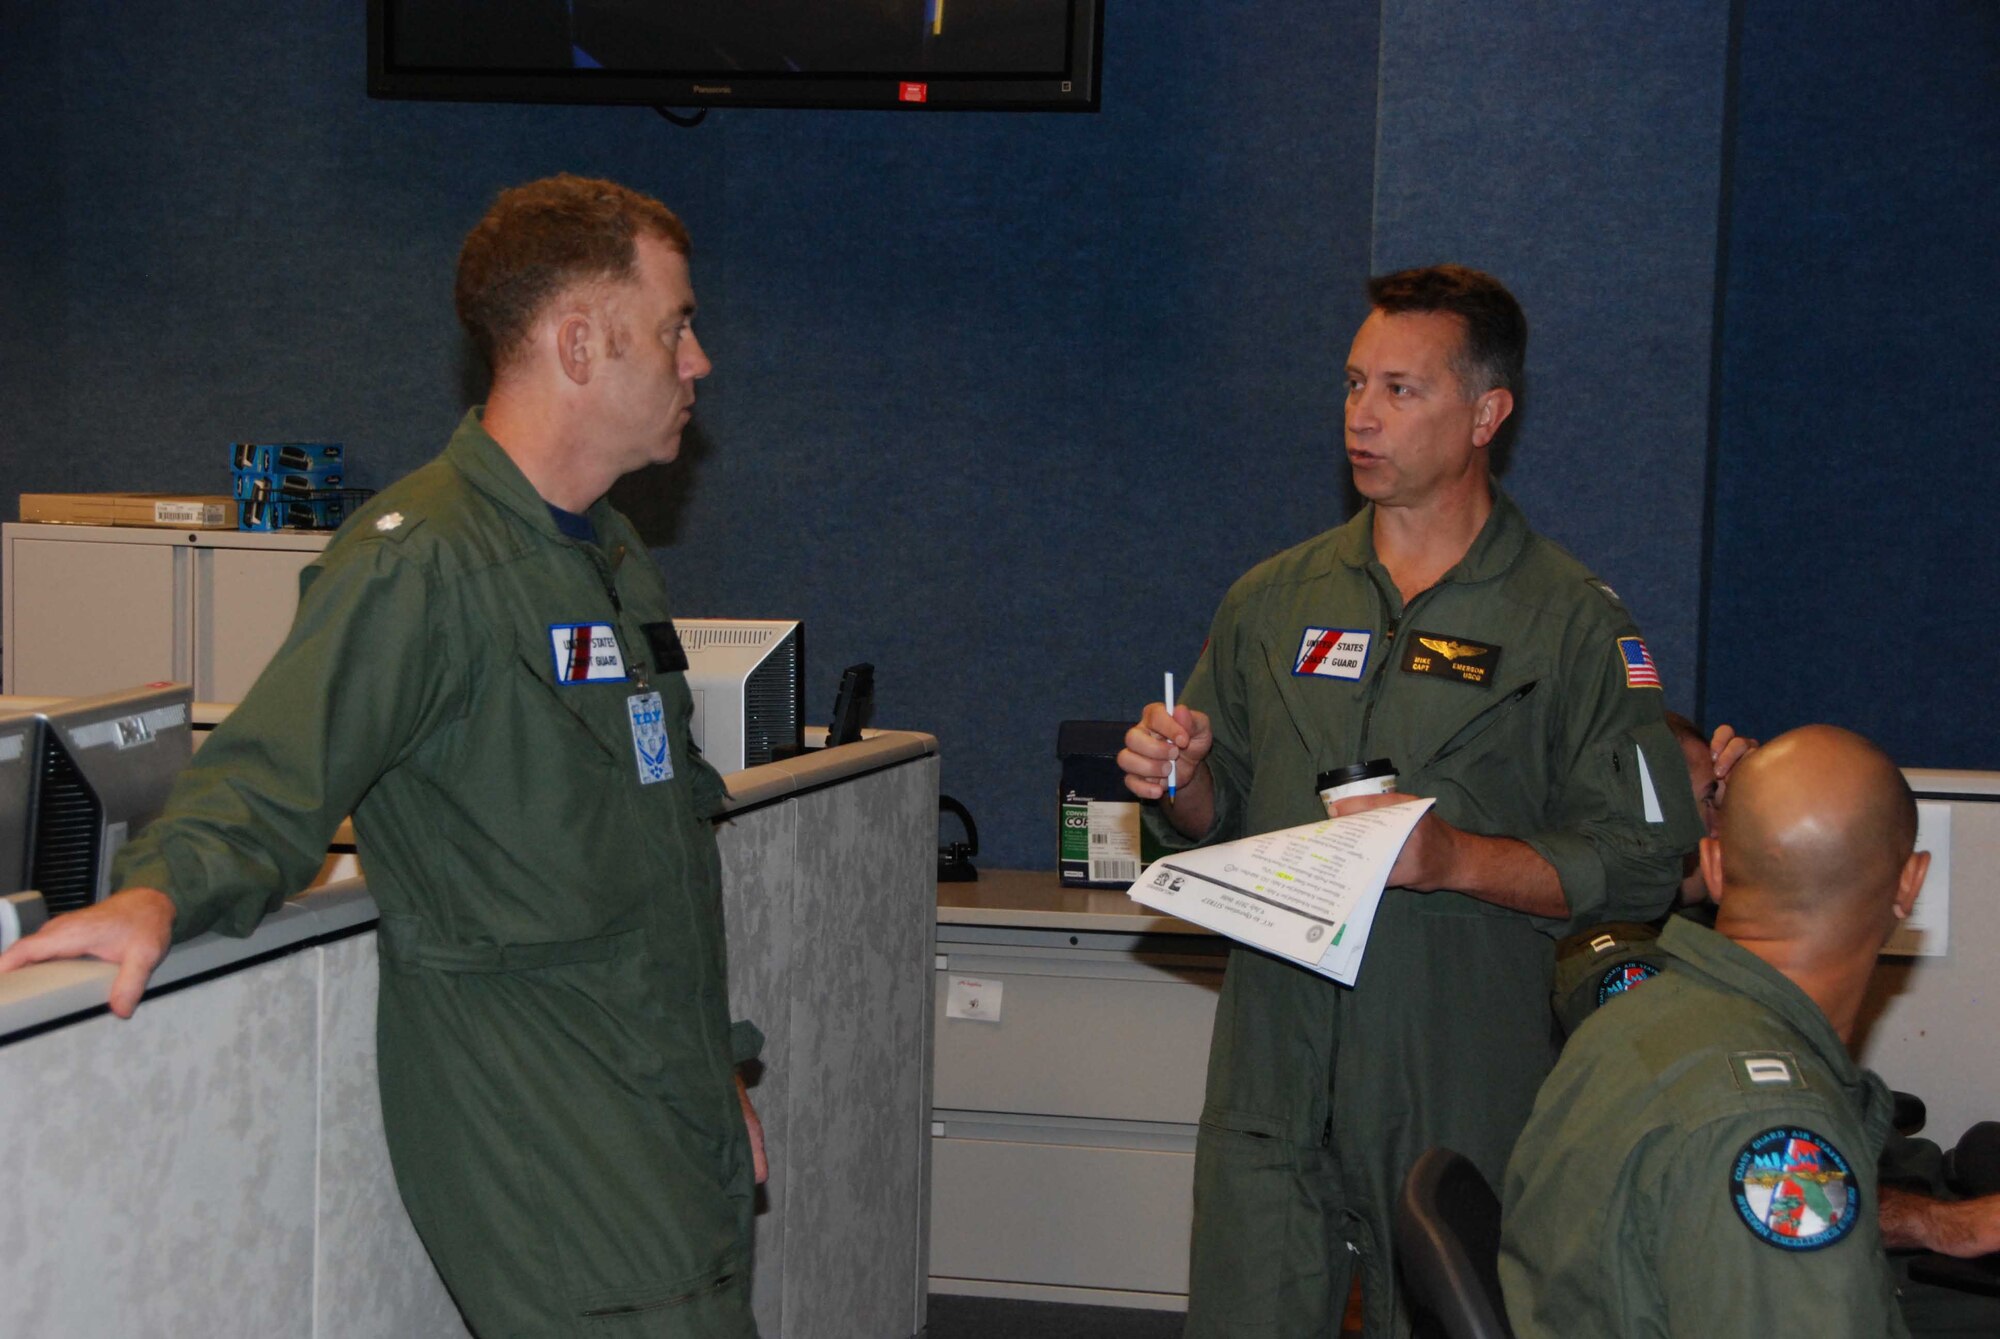 U.S. Coast Guard Cmdr. Andrew Cromwell, Aviation Coordination Command deputy director (left), and U.S. Coast Guard Capt. Mike Emerson, ACC director, discuss Deepwater Horizon Response air operations.